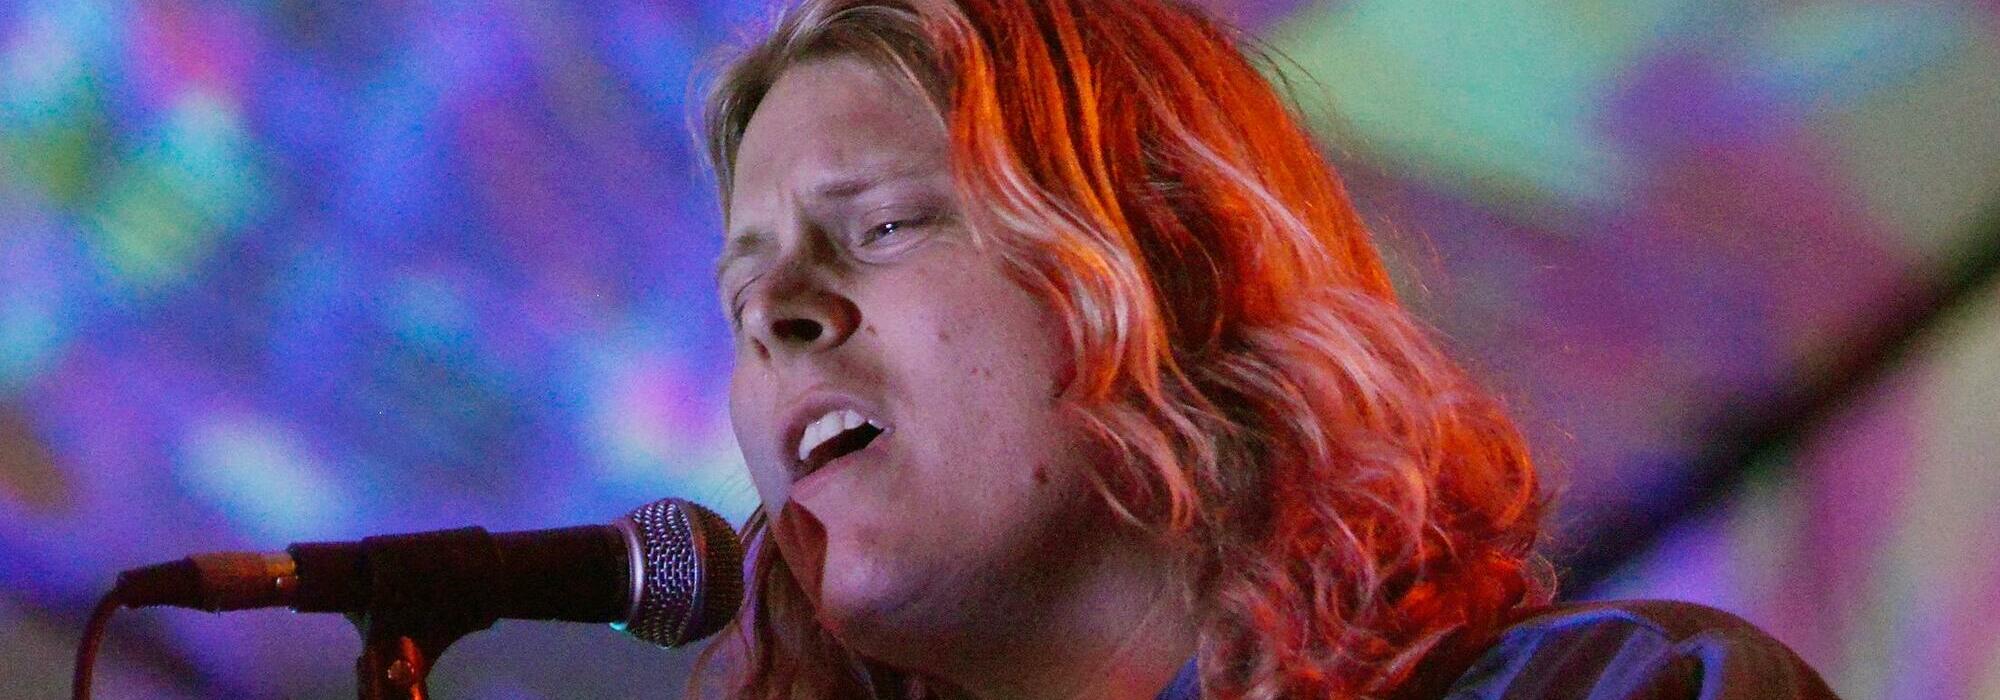 A Ty Segall live event